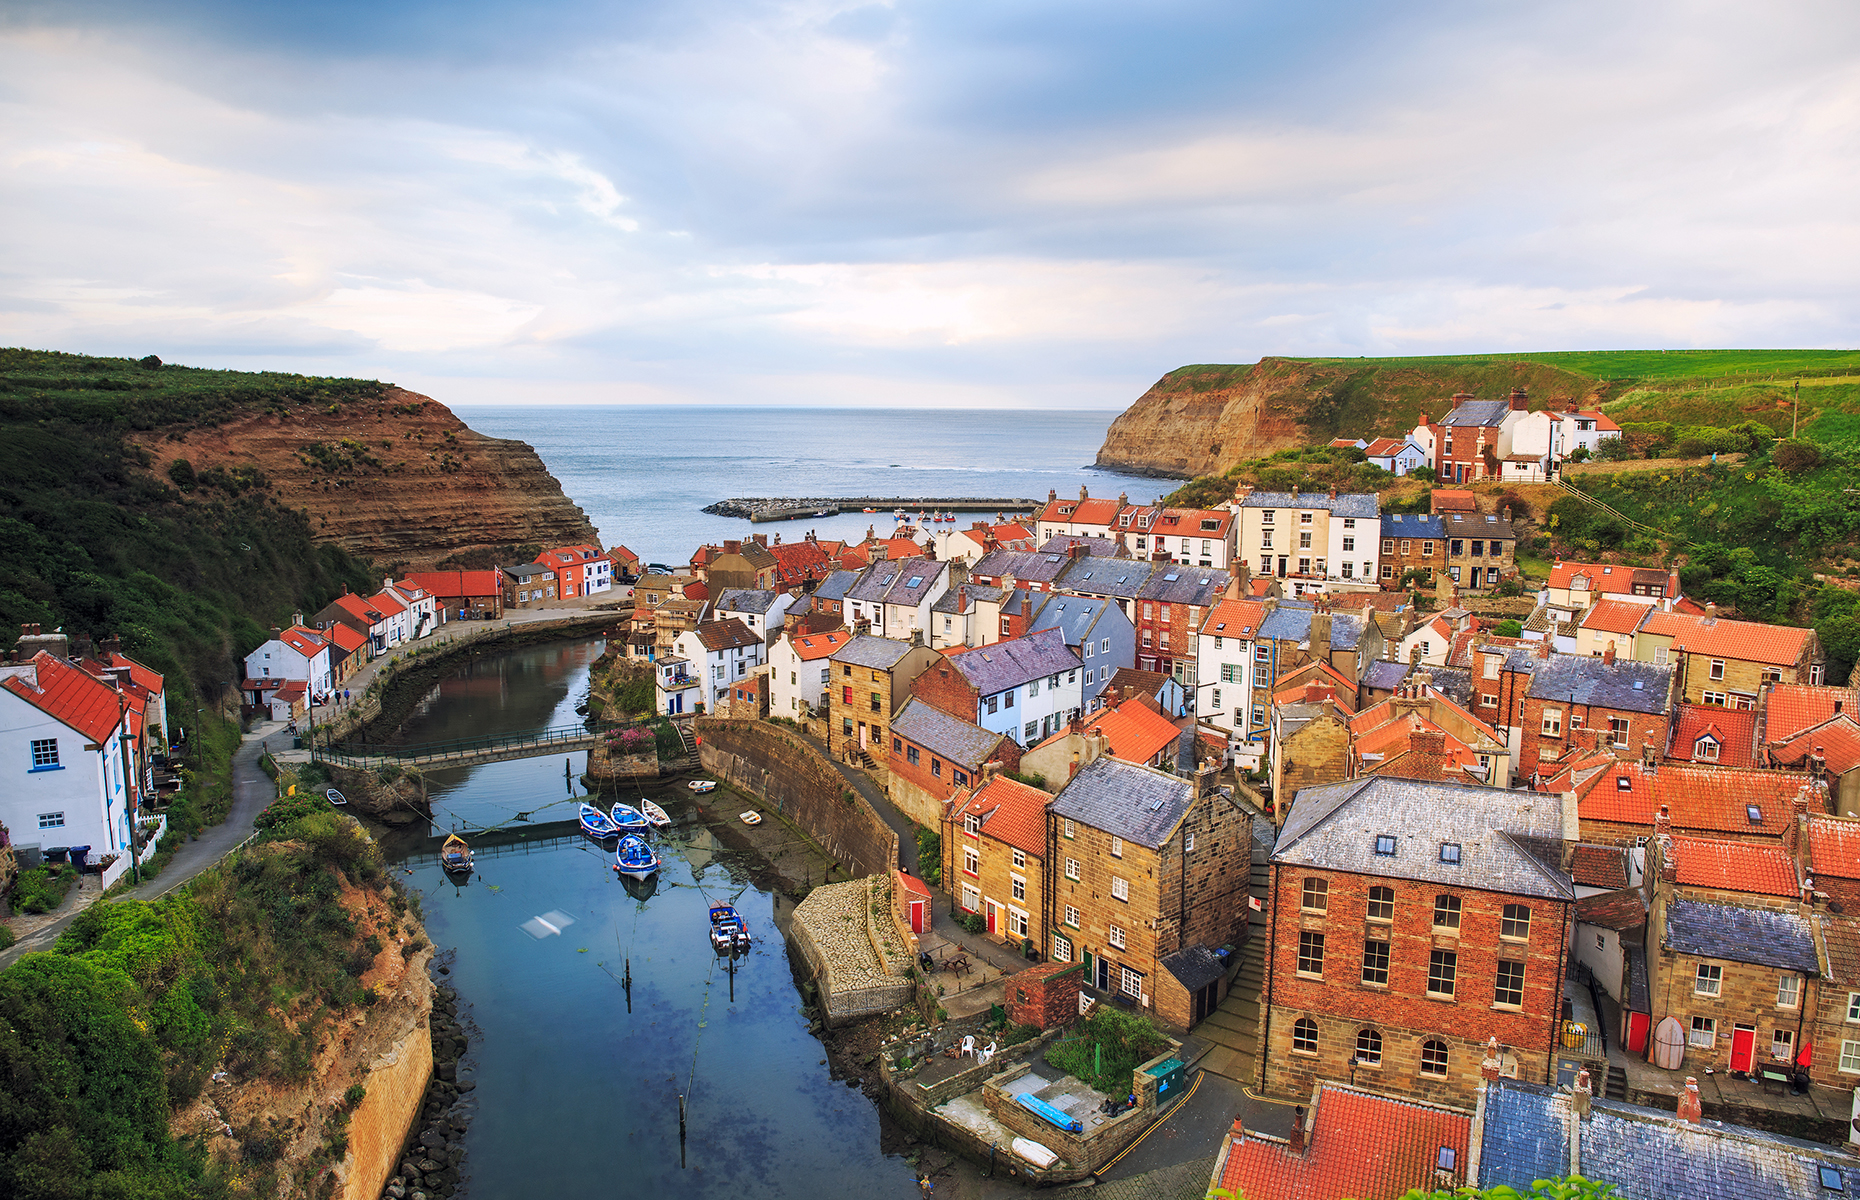 Staithes, North Yorkshire, England. (Image: Lukasz/Shutterstock)